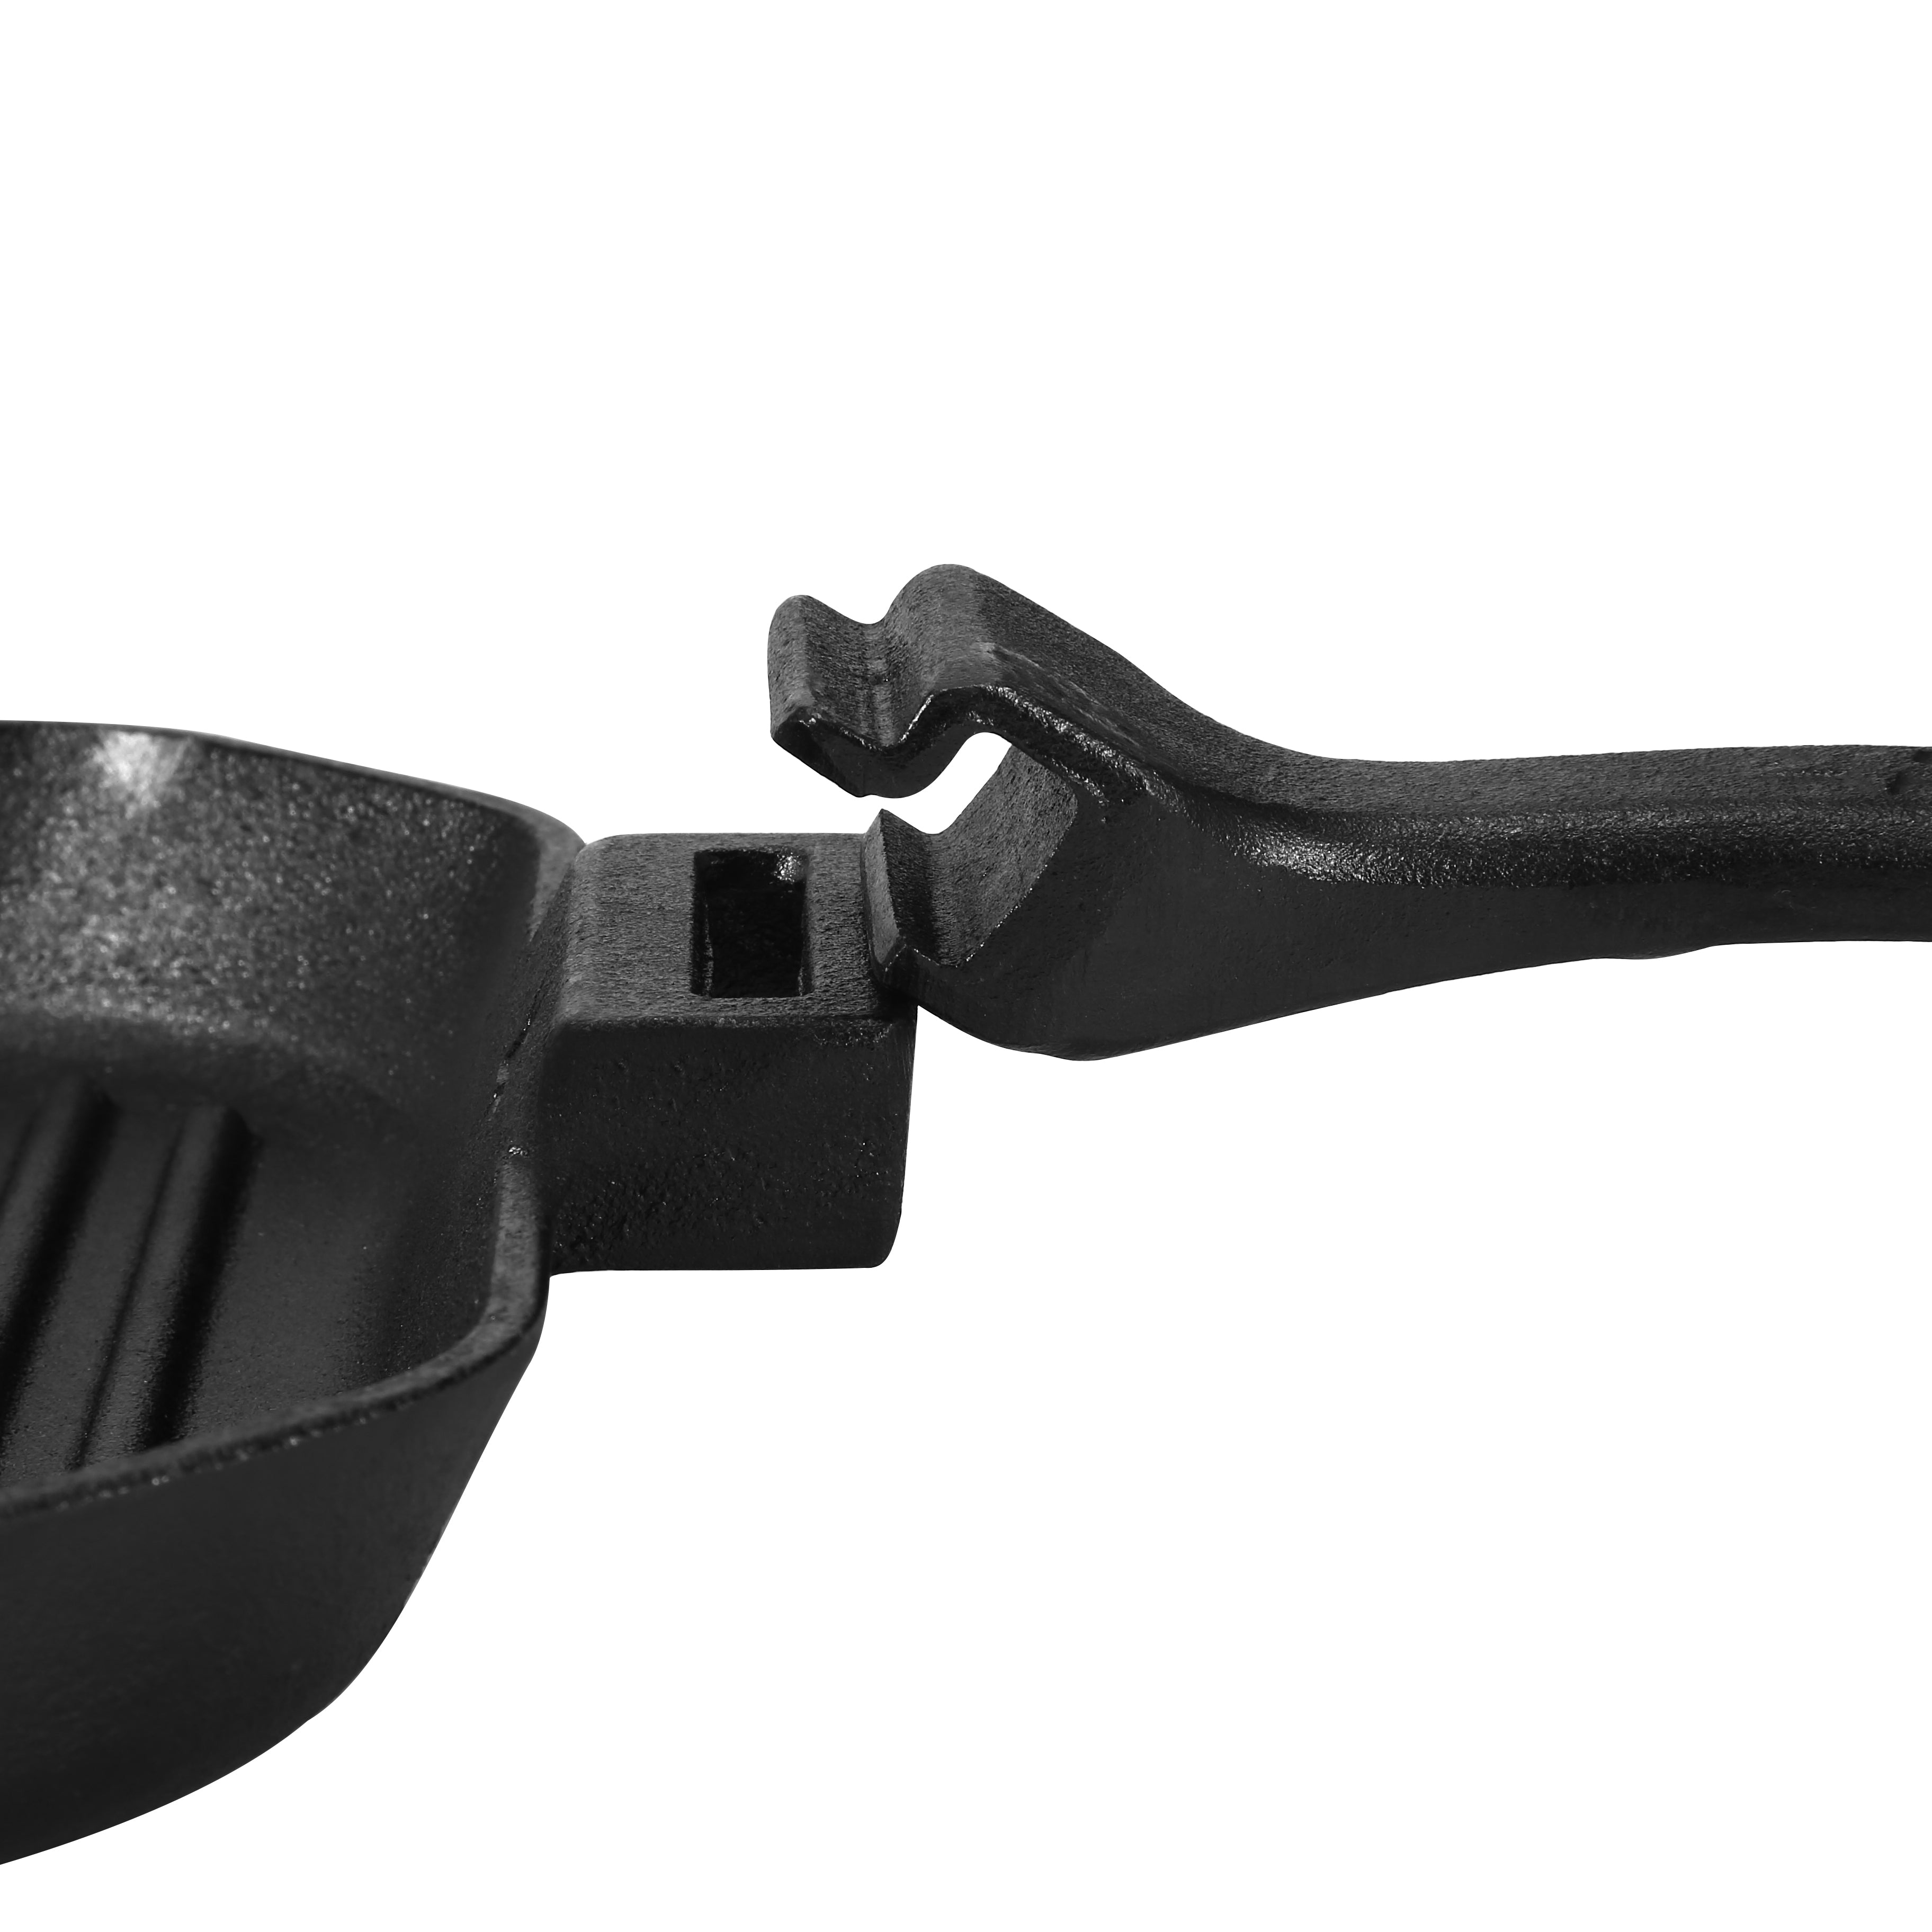 CAST IRON GRILLING PAN